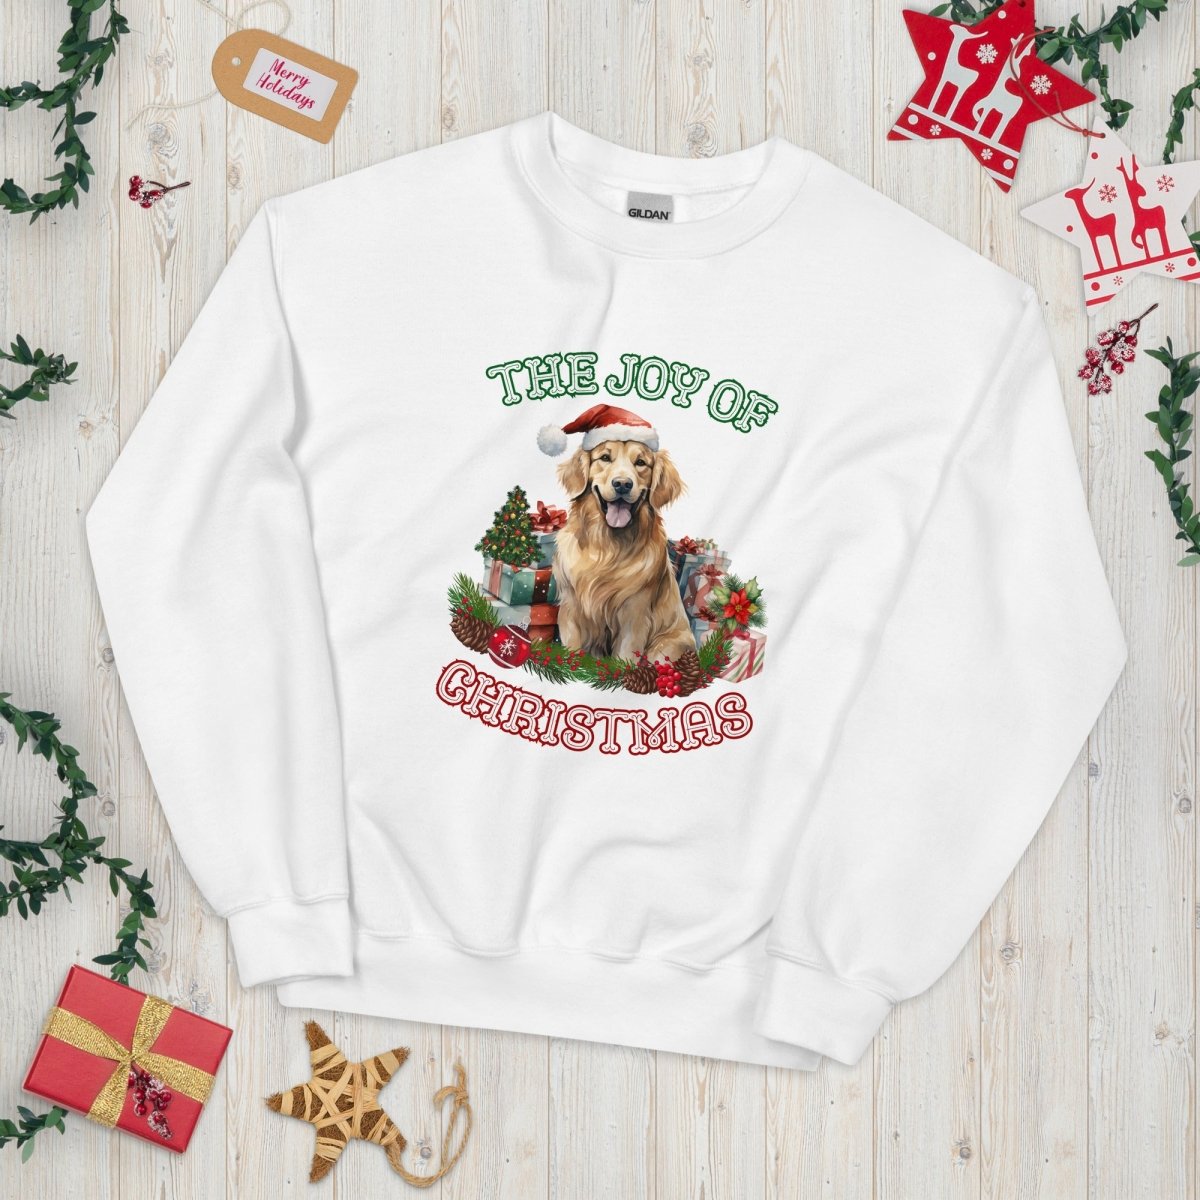 Christmas Golden Retriever Pullover - High Quality Festive Unisex Sweater, Gift for Golden Retriever Owner, Gift for Doglovers, Cute Xmas Dog - Everything Pixel